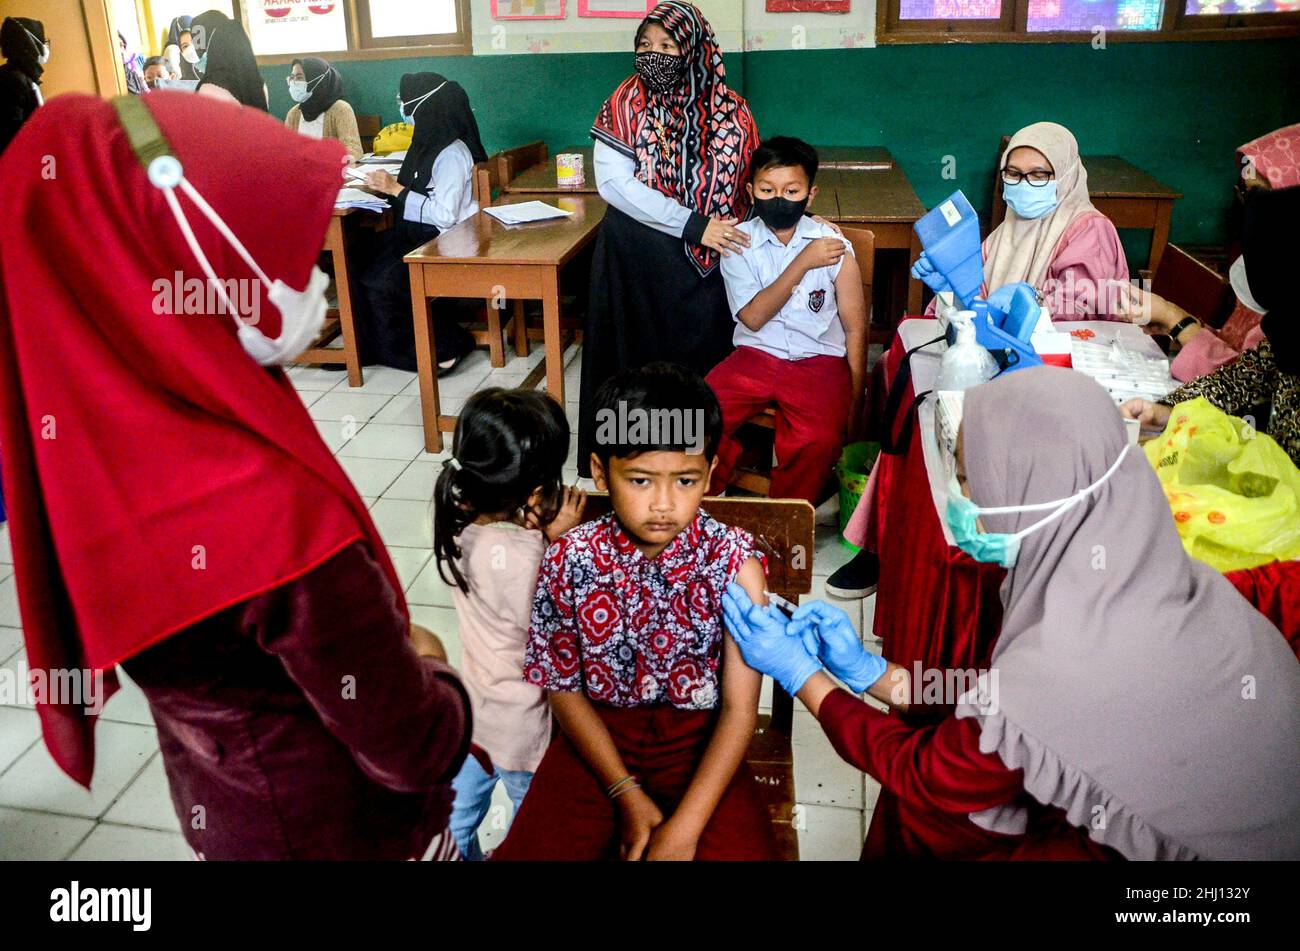 Bogor, Indonesia. 26th Jan, 2022. A health worker administers a dose of COVID-19 vaccine to a boy during vaccination for children aged 6 to 11 in Bogor, West Java, Indonesia, Jan. 26, 2022. Credit: Sandika Fadilah/Xinhua/Alamy Live News Stock Photo